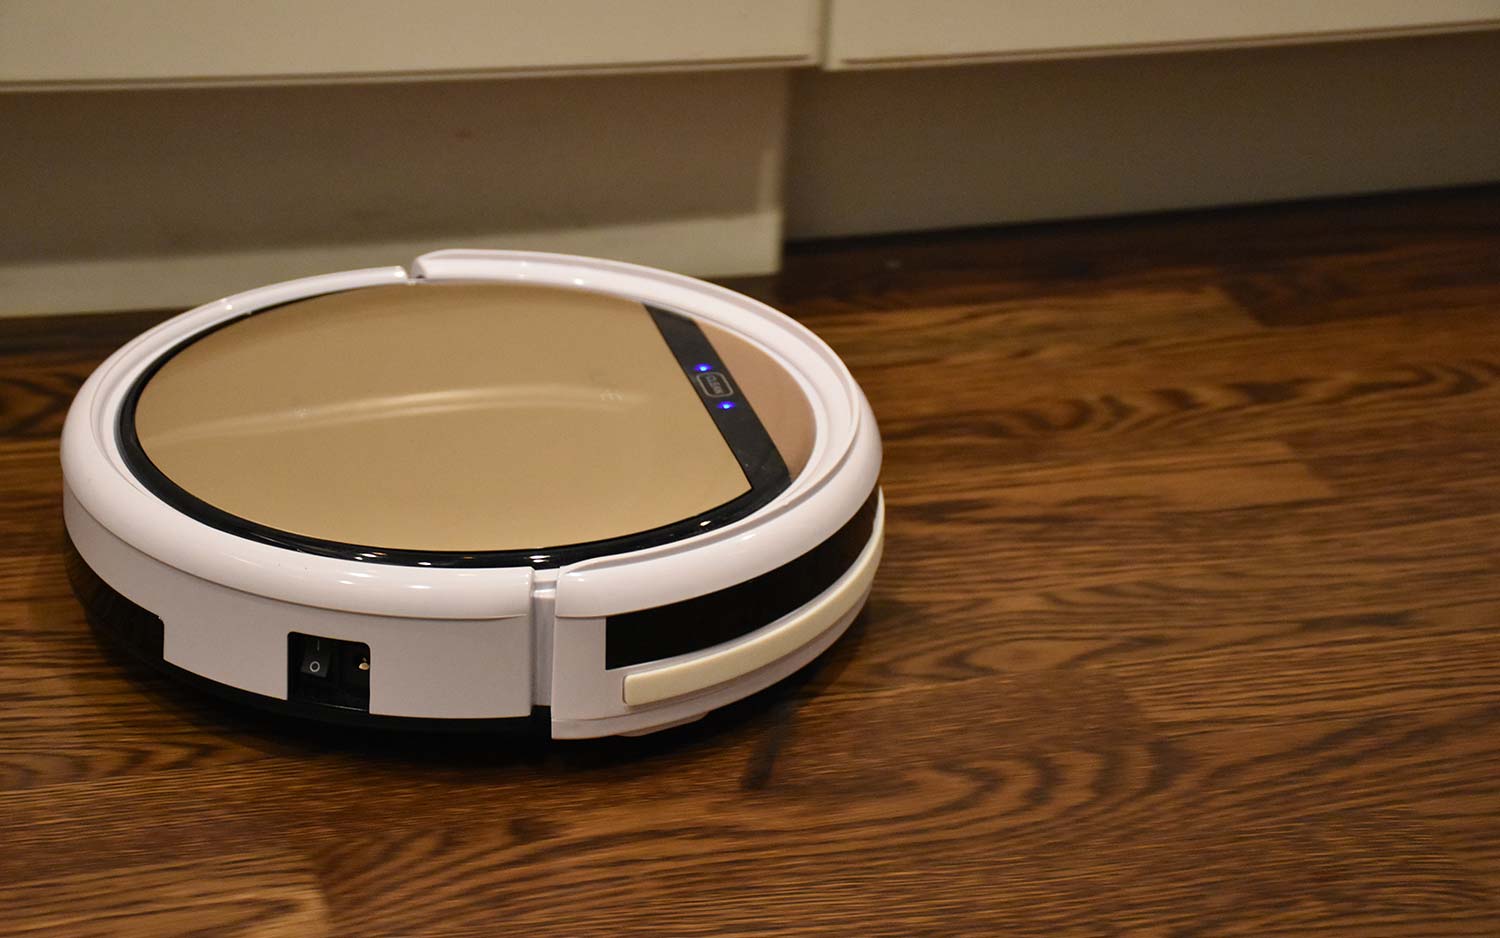 iLife V5s Pro Robot Vacuum - Full Review and Benchmarks | Tom's Guide